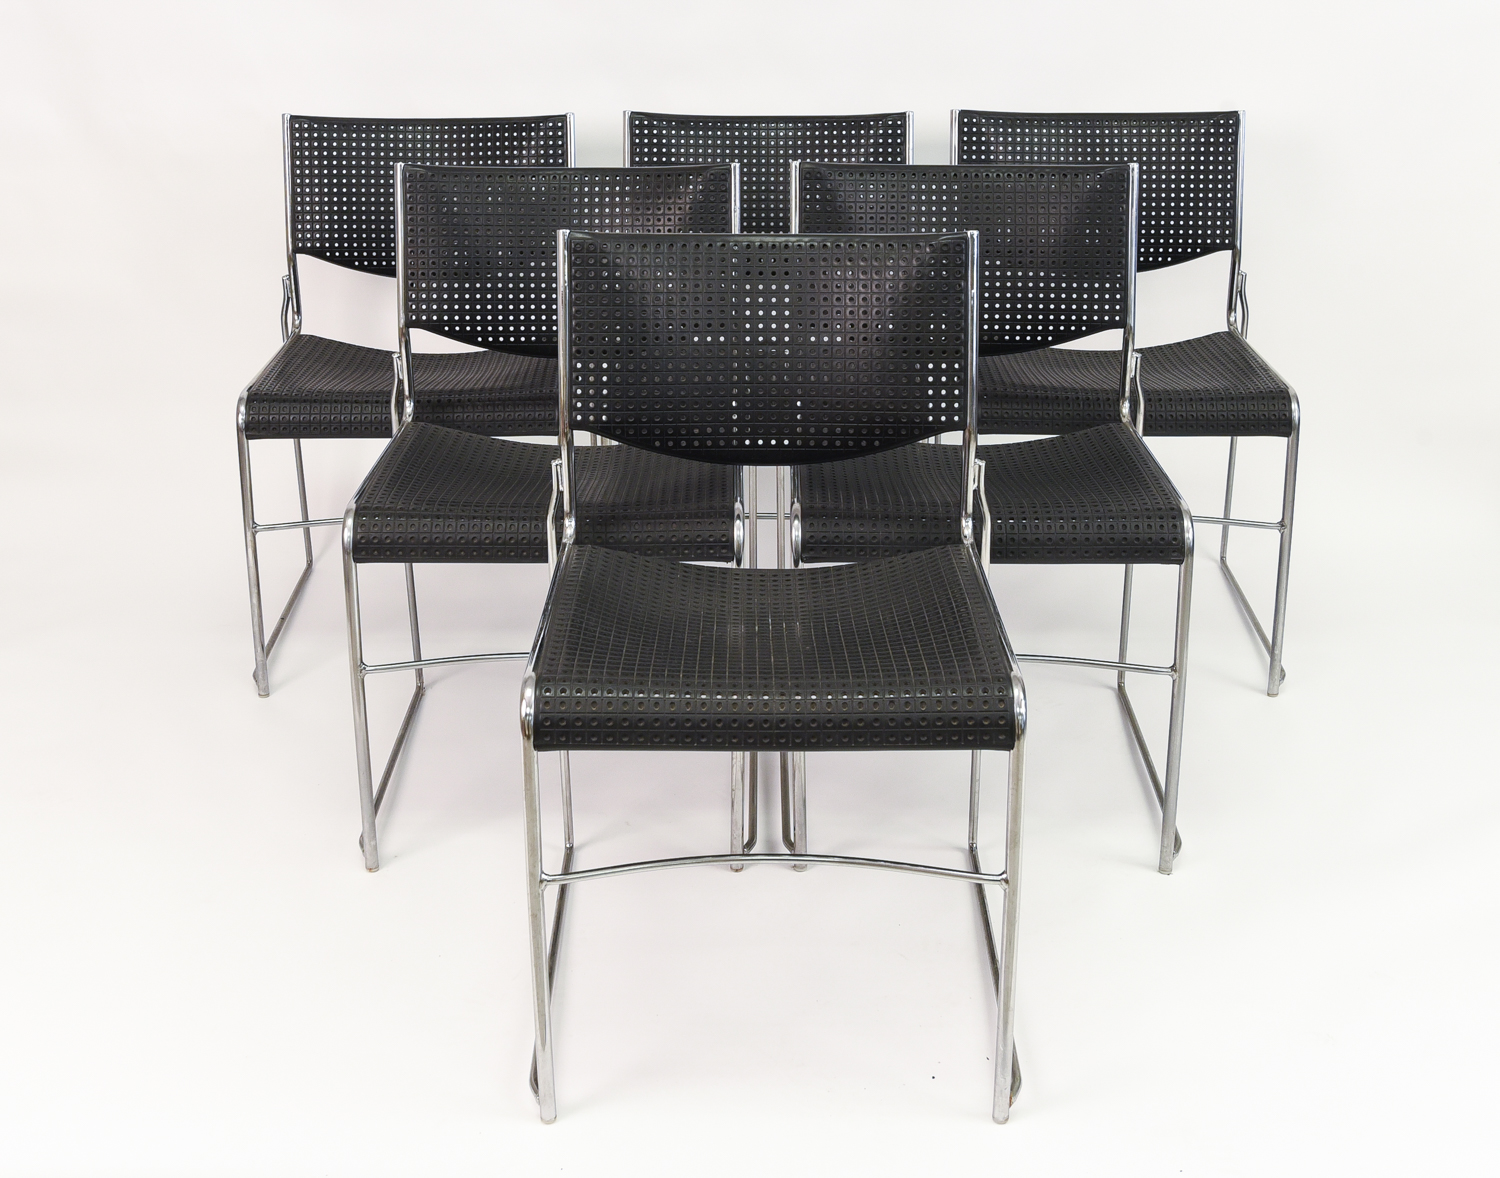 6 Wafer Stacking Chairs By Shelby Williams Lofty Marketplace